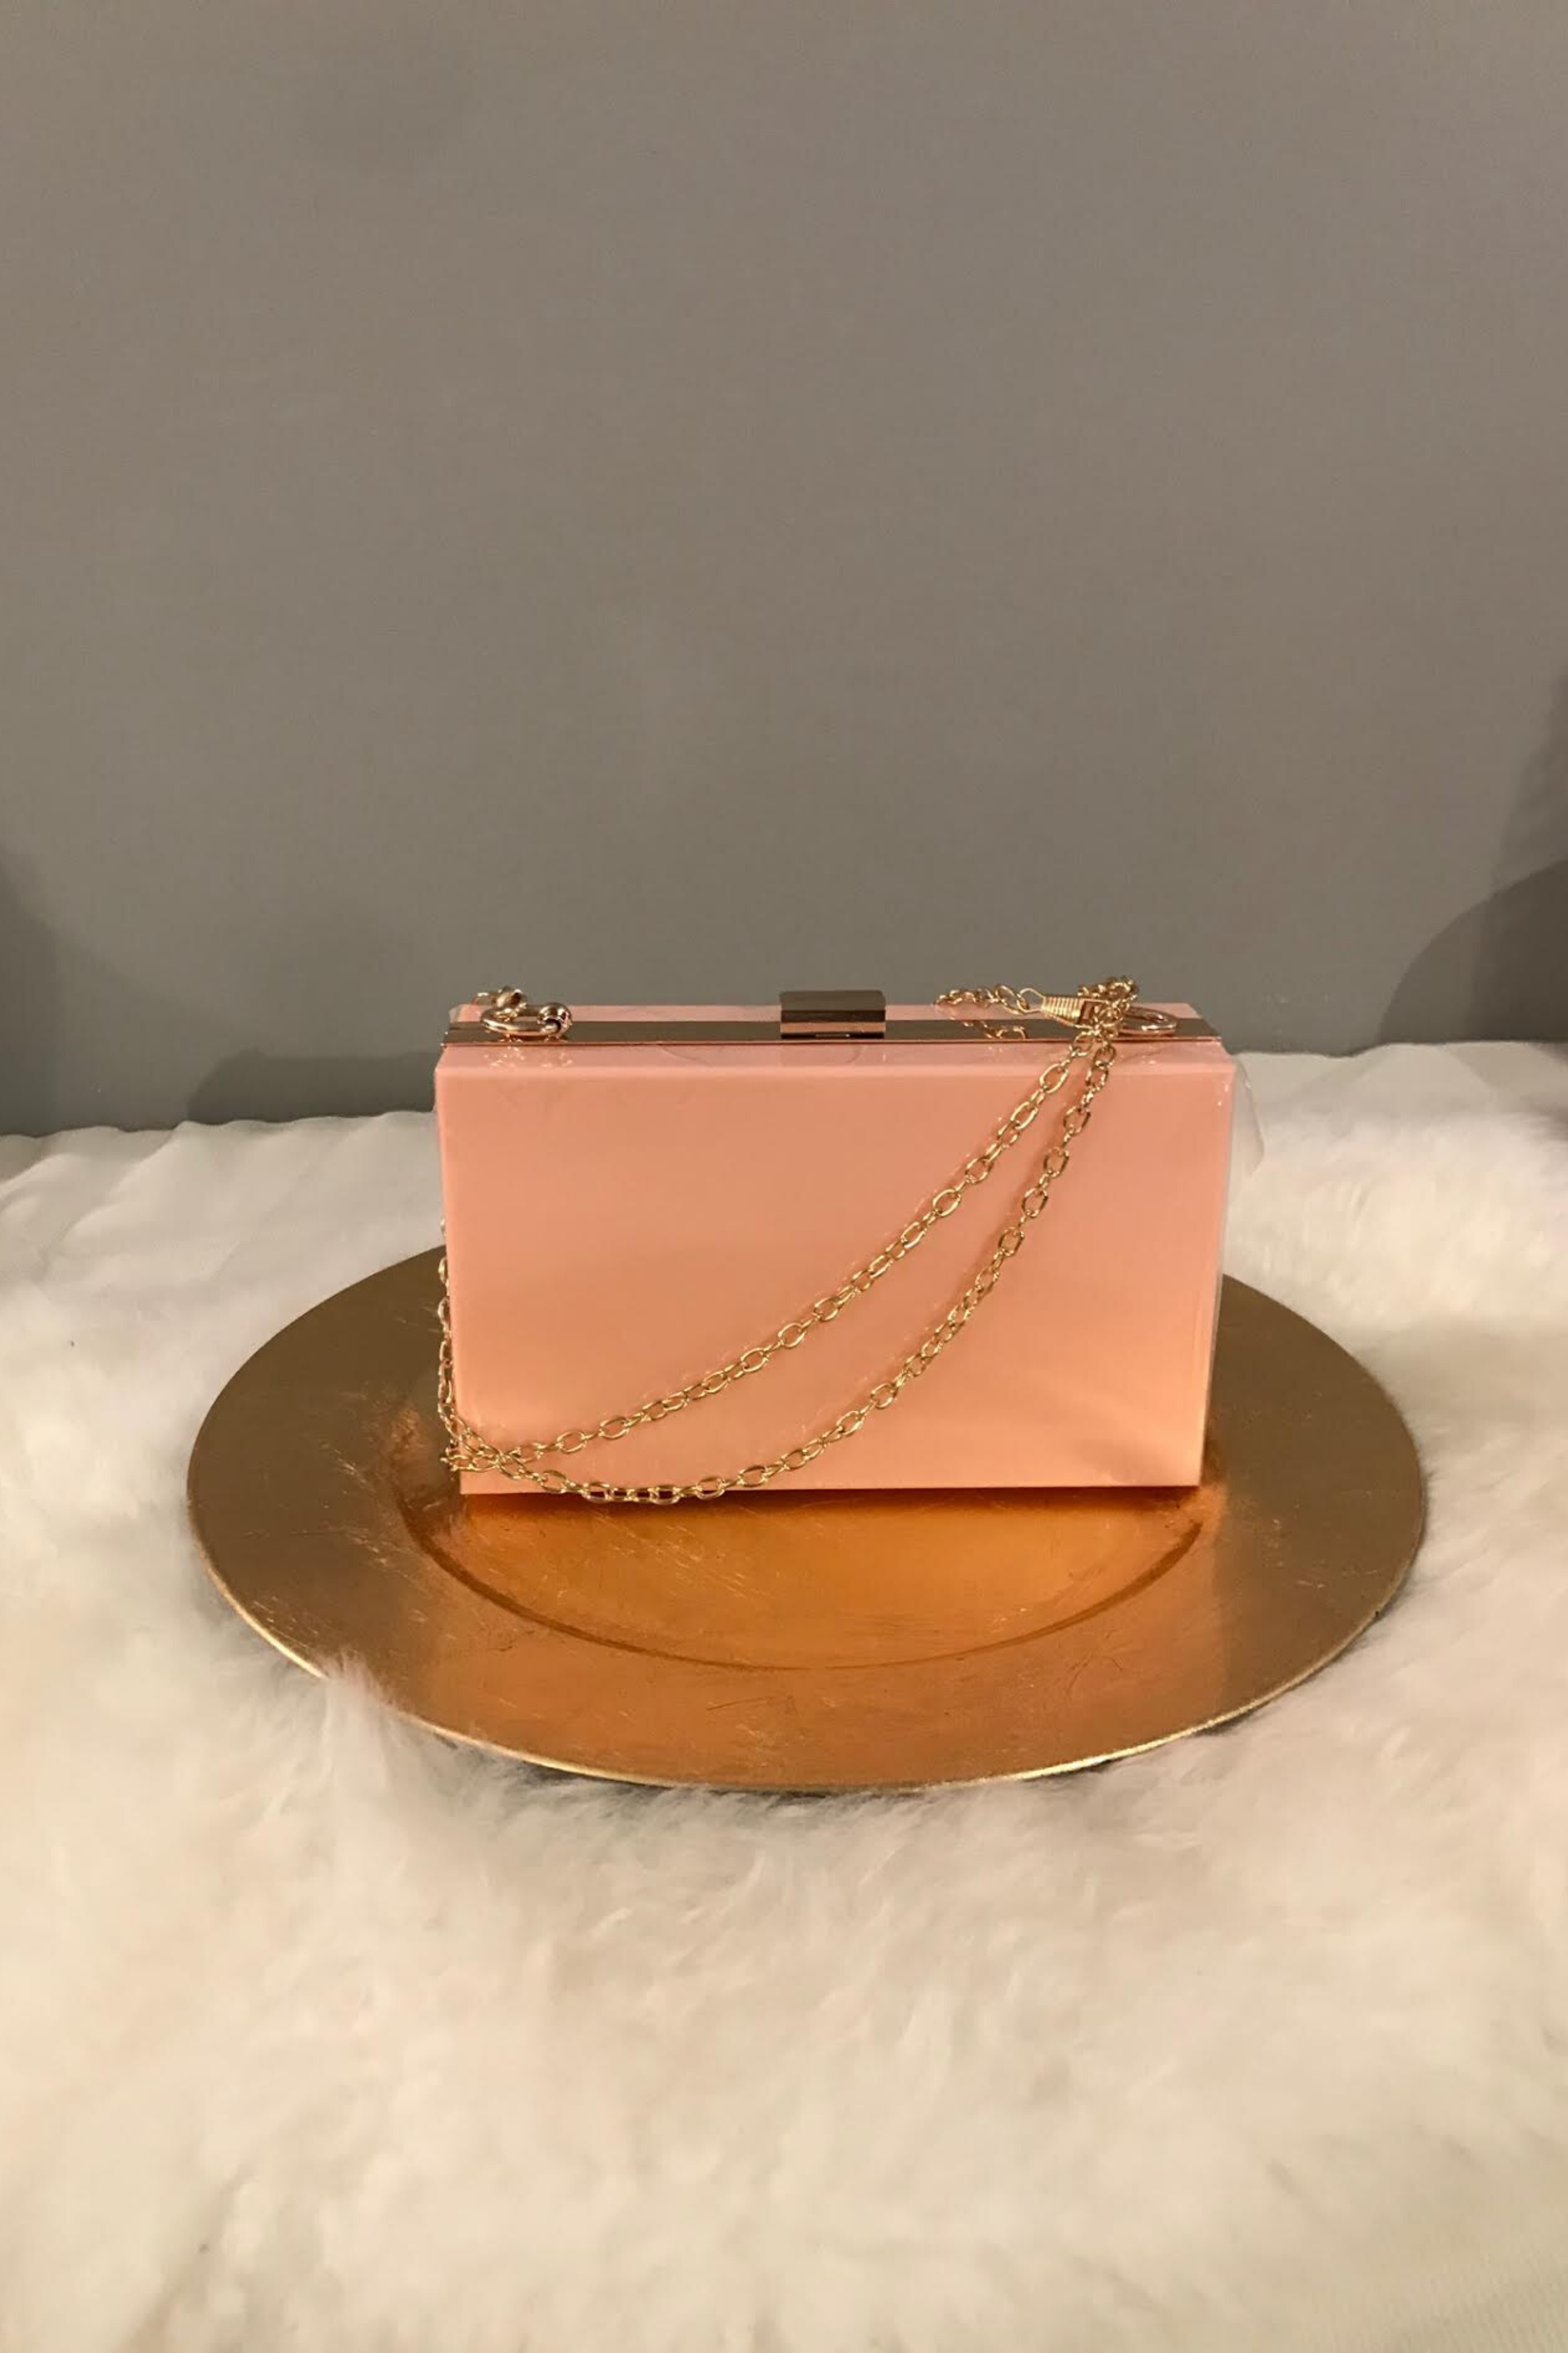 Acrylic clutch bag shoulder bag with removable chain Pink - Blanks